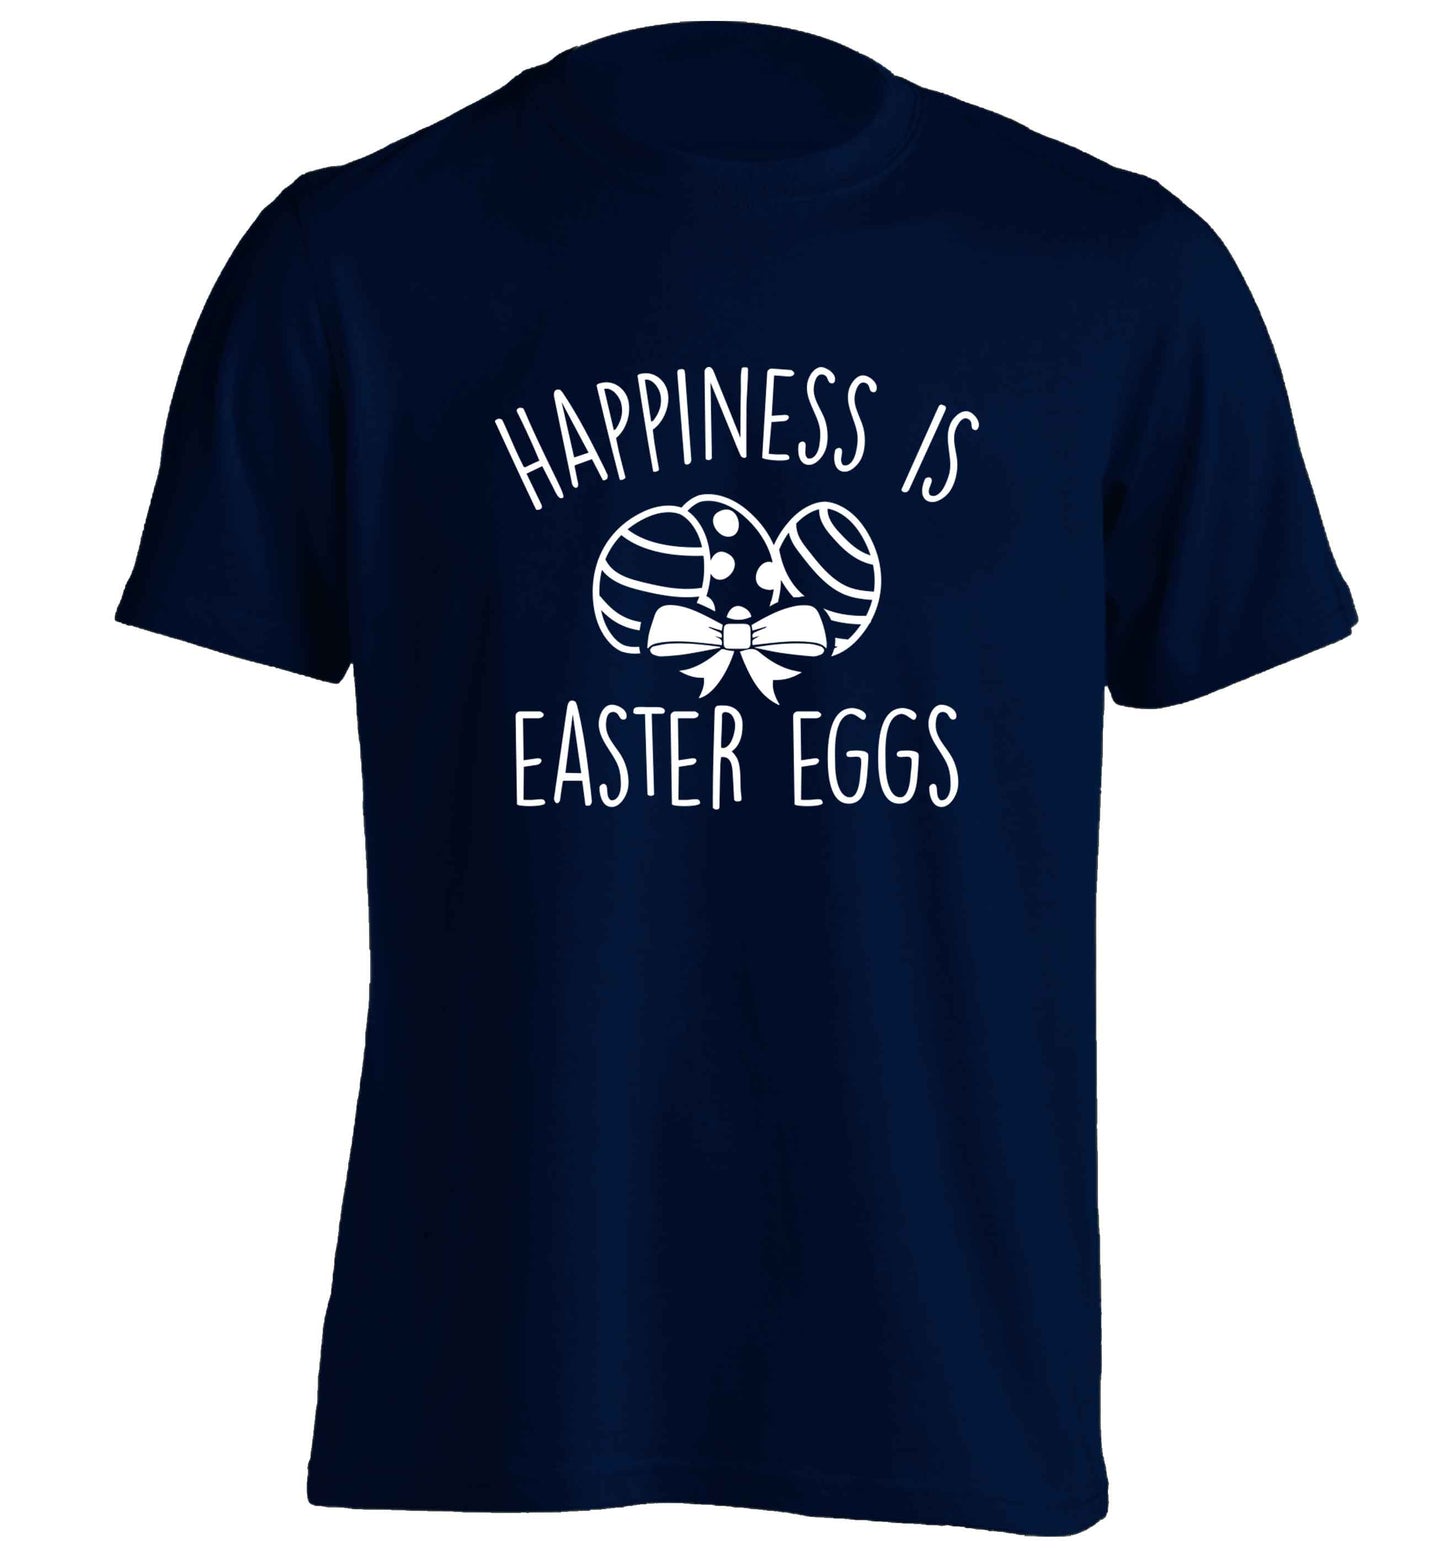 Happiness is Easter eggs adults unisex navy Tshirt 2XL